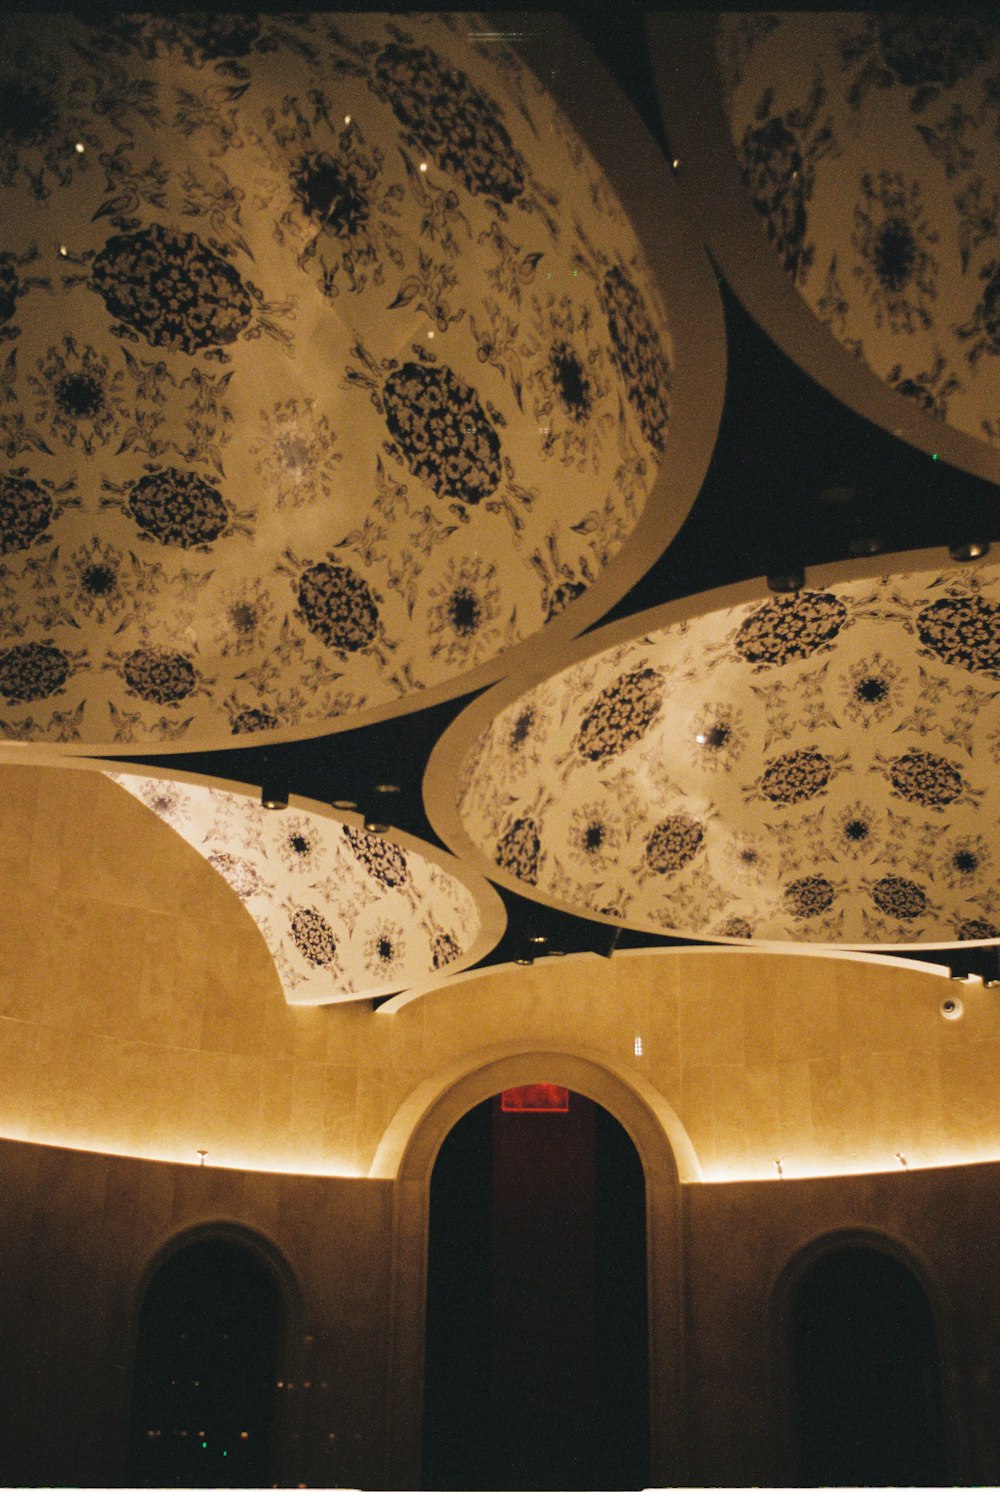 the ceiling of a building is decorated with intricate designs